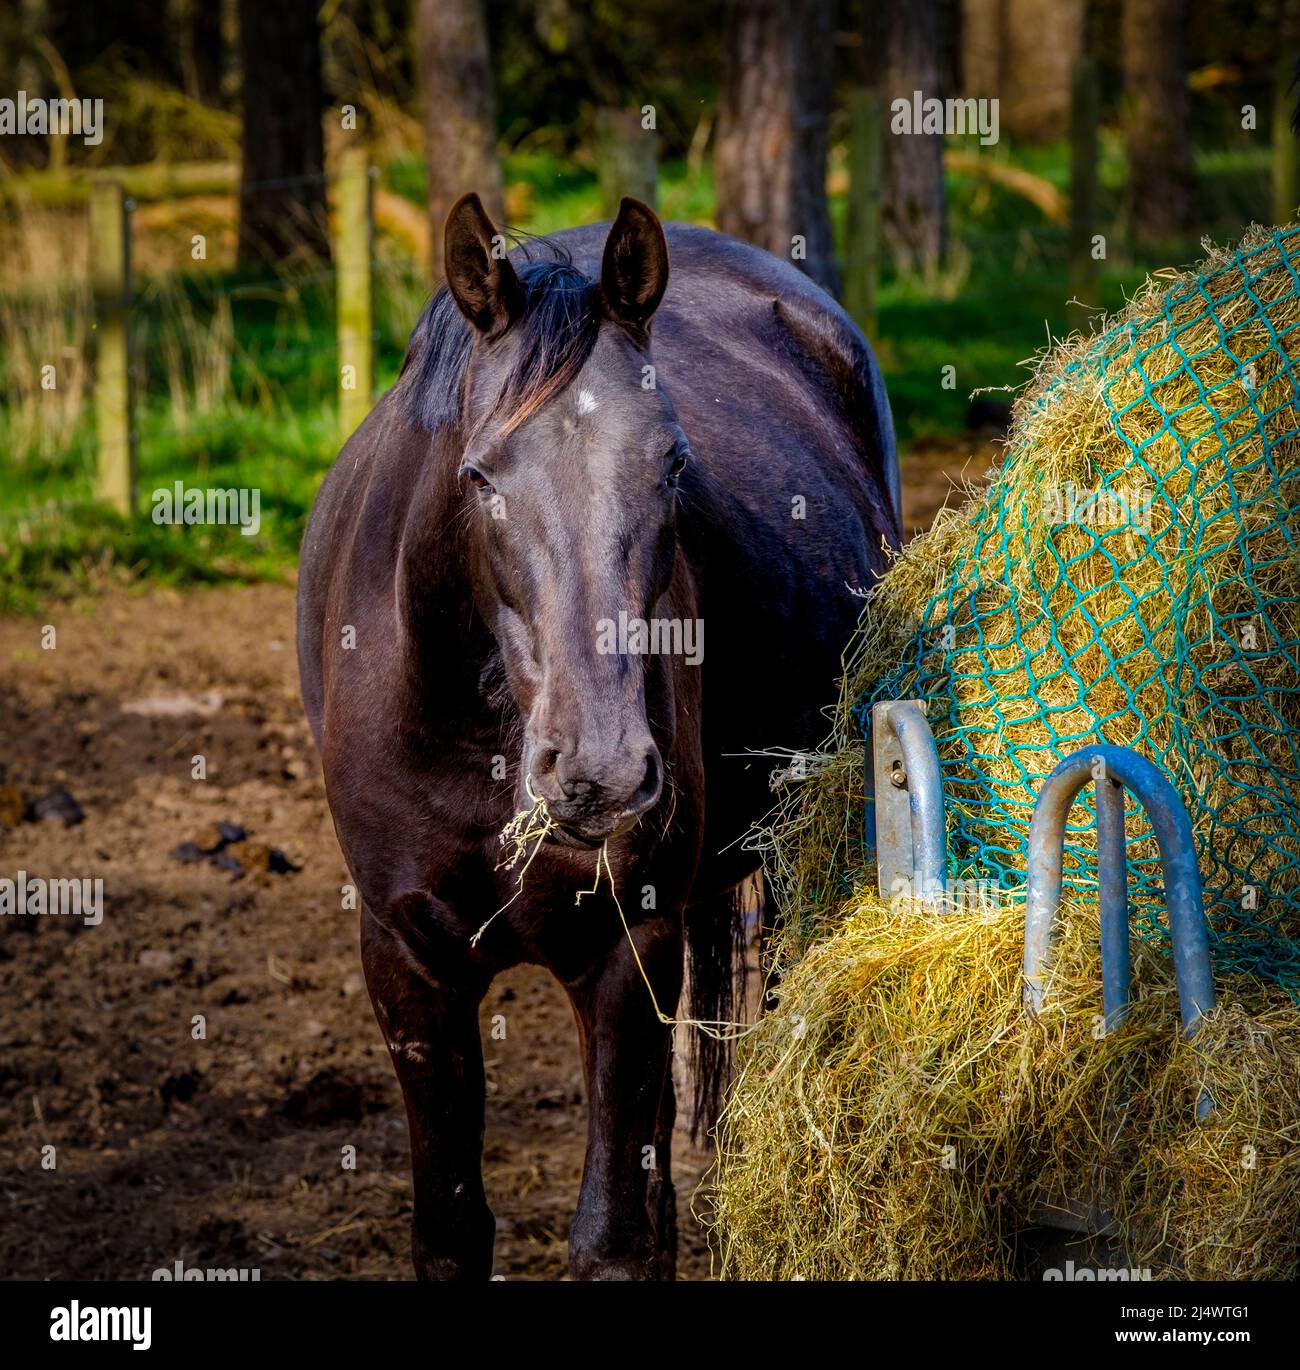 Black horse eating hay outdoors Stock Photo